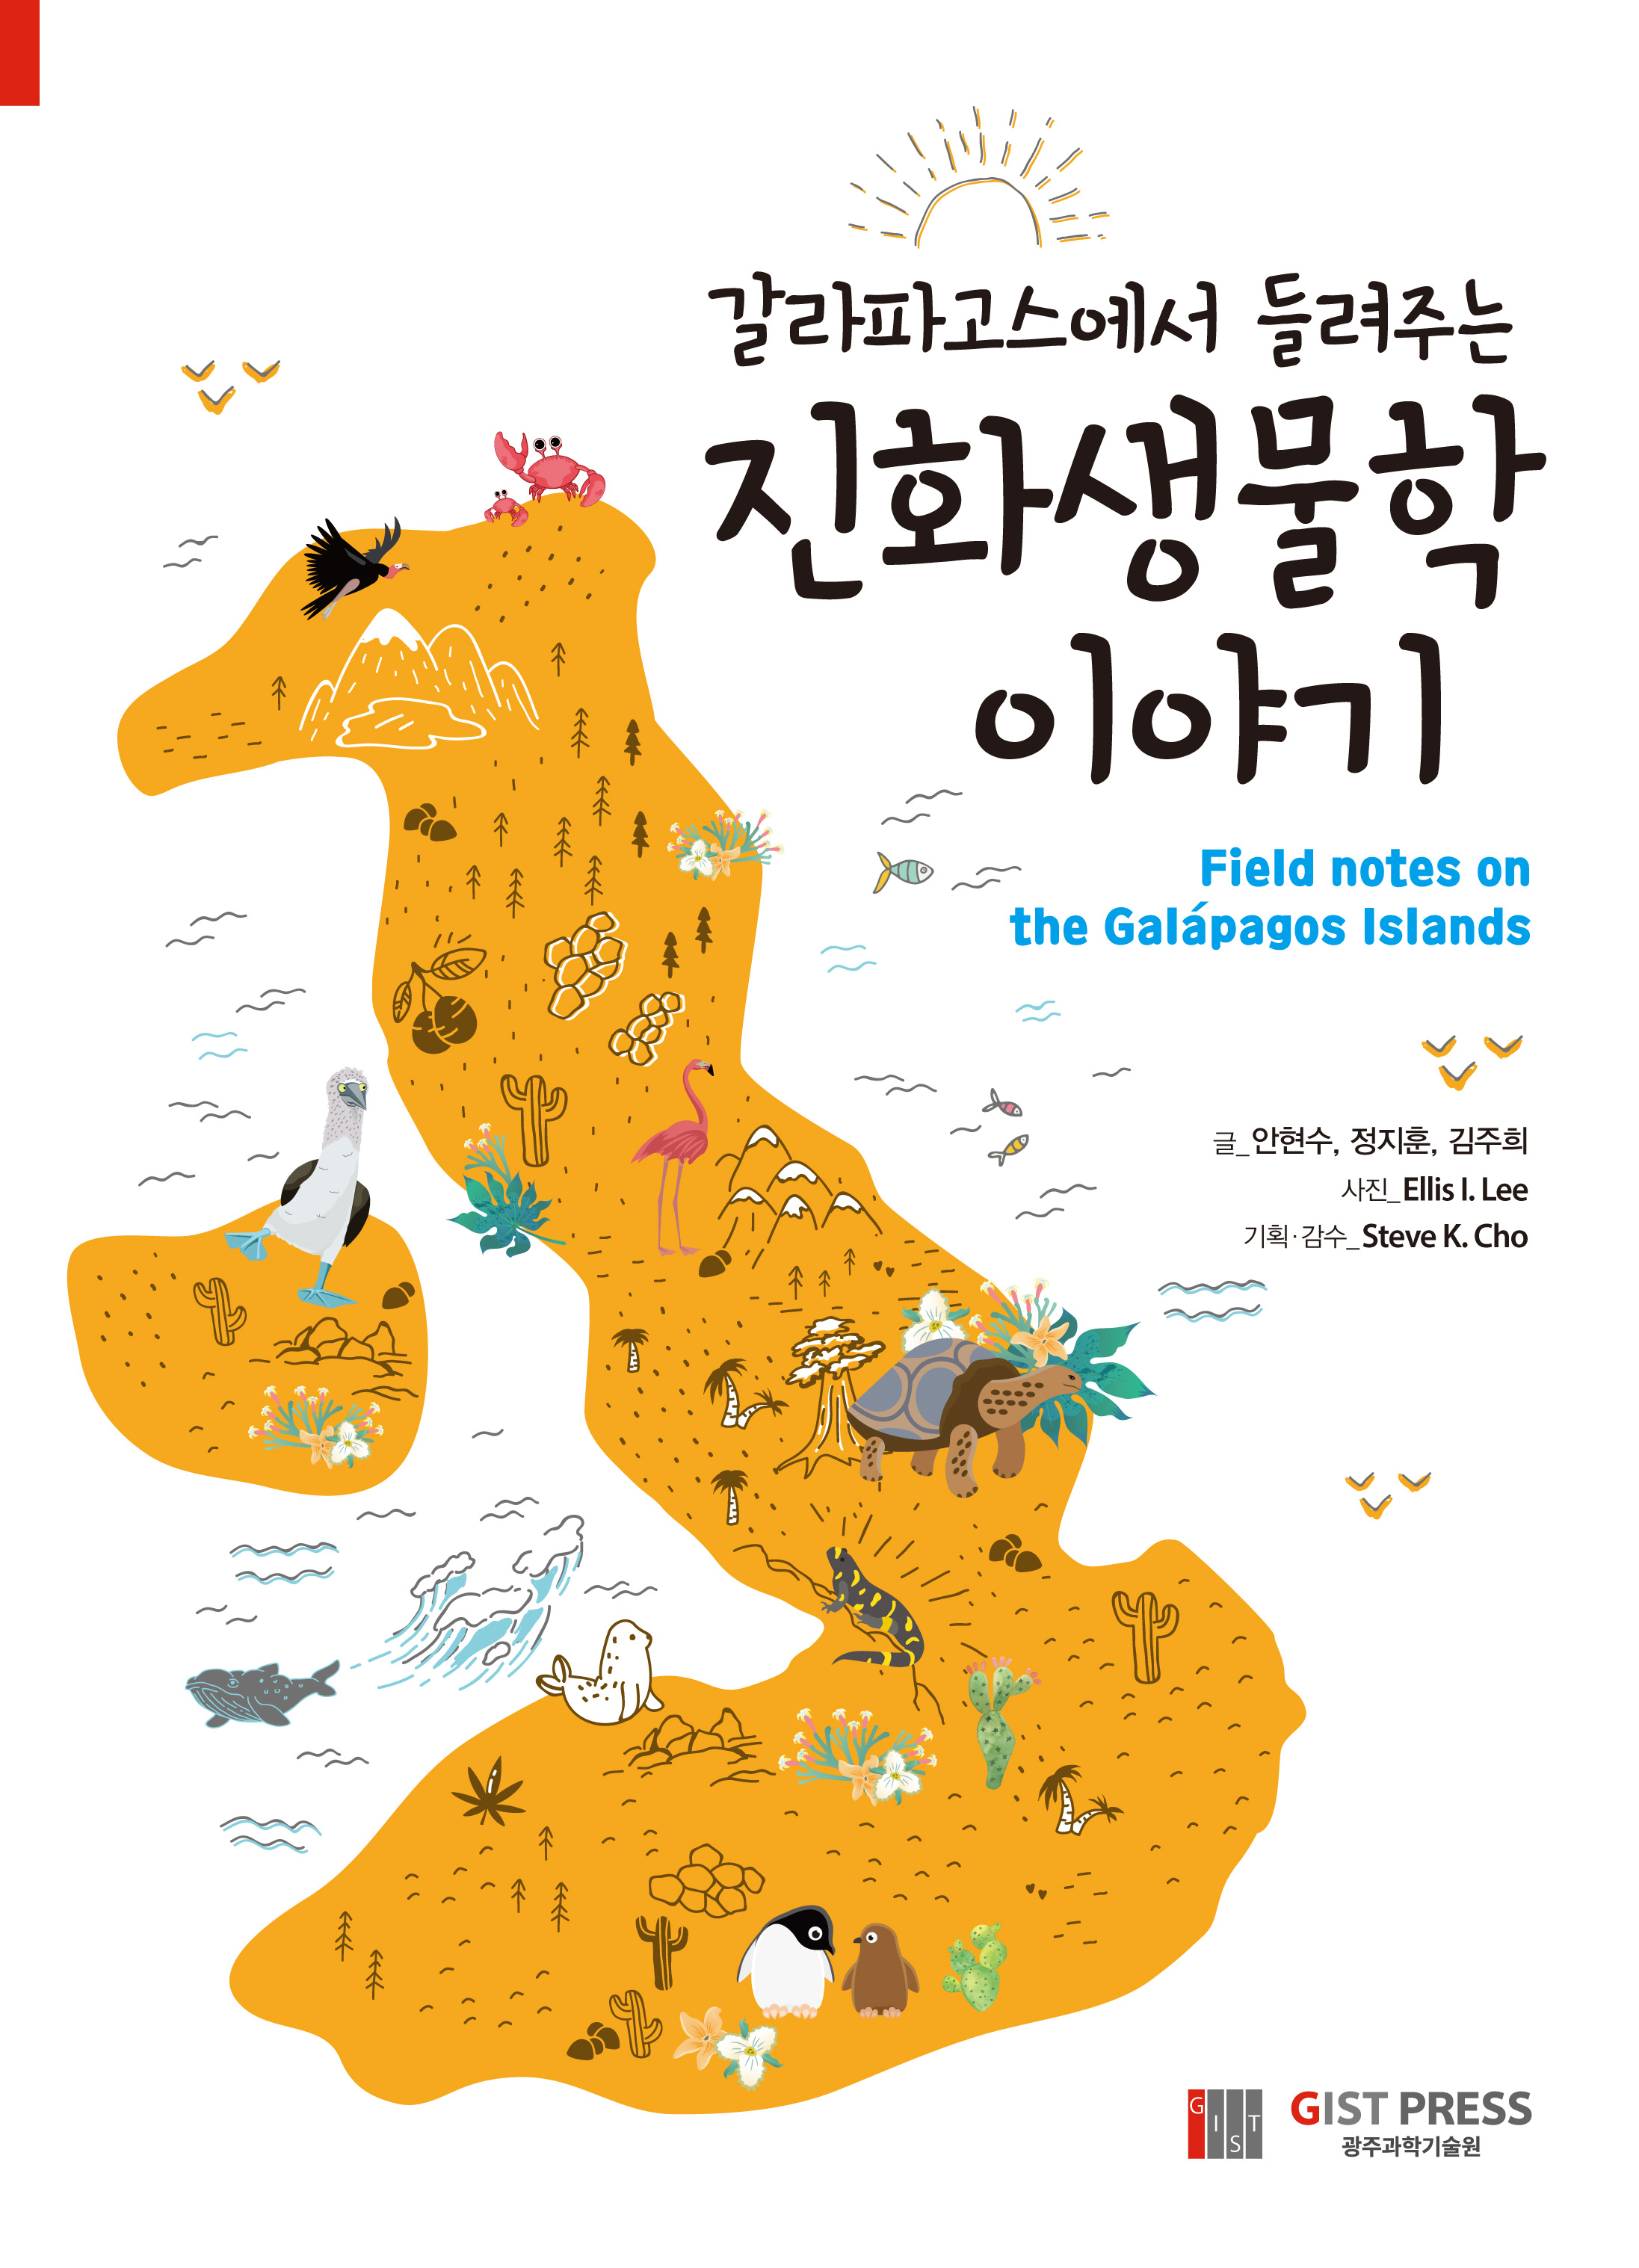 GIST PRESS's 'Field notes on the Galápagos Islands' selected as a 2020 Outstanding Academic Book of the Korean Academy of Sciences 이미지